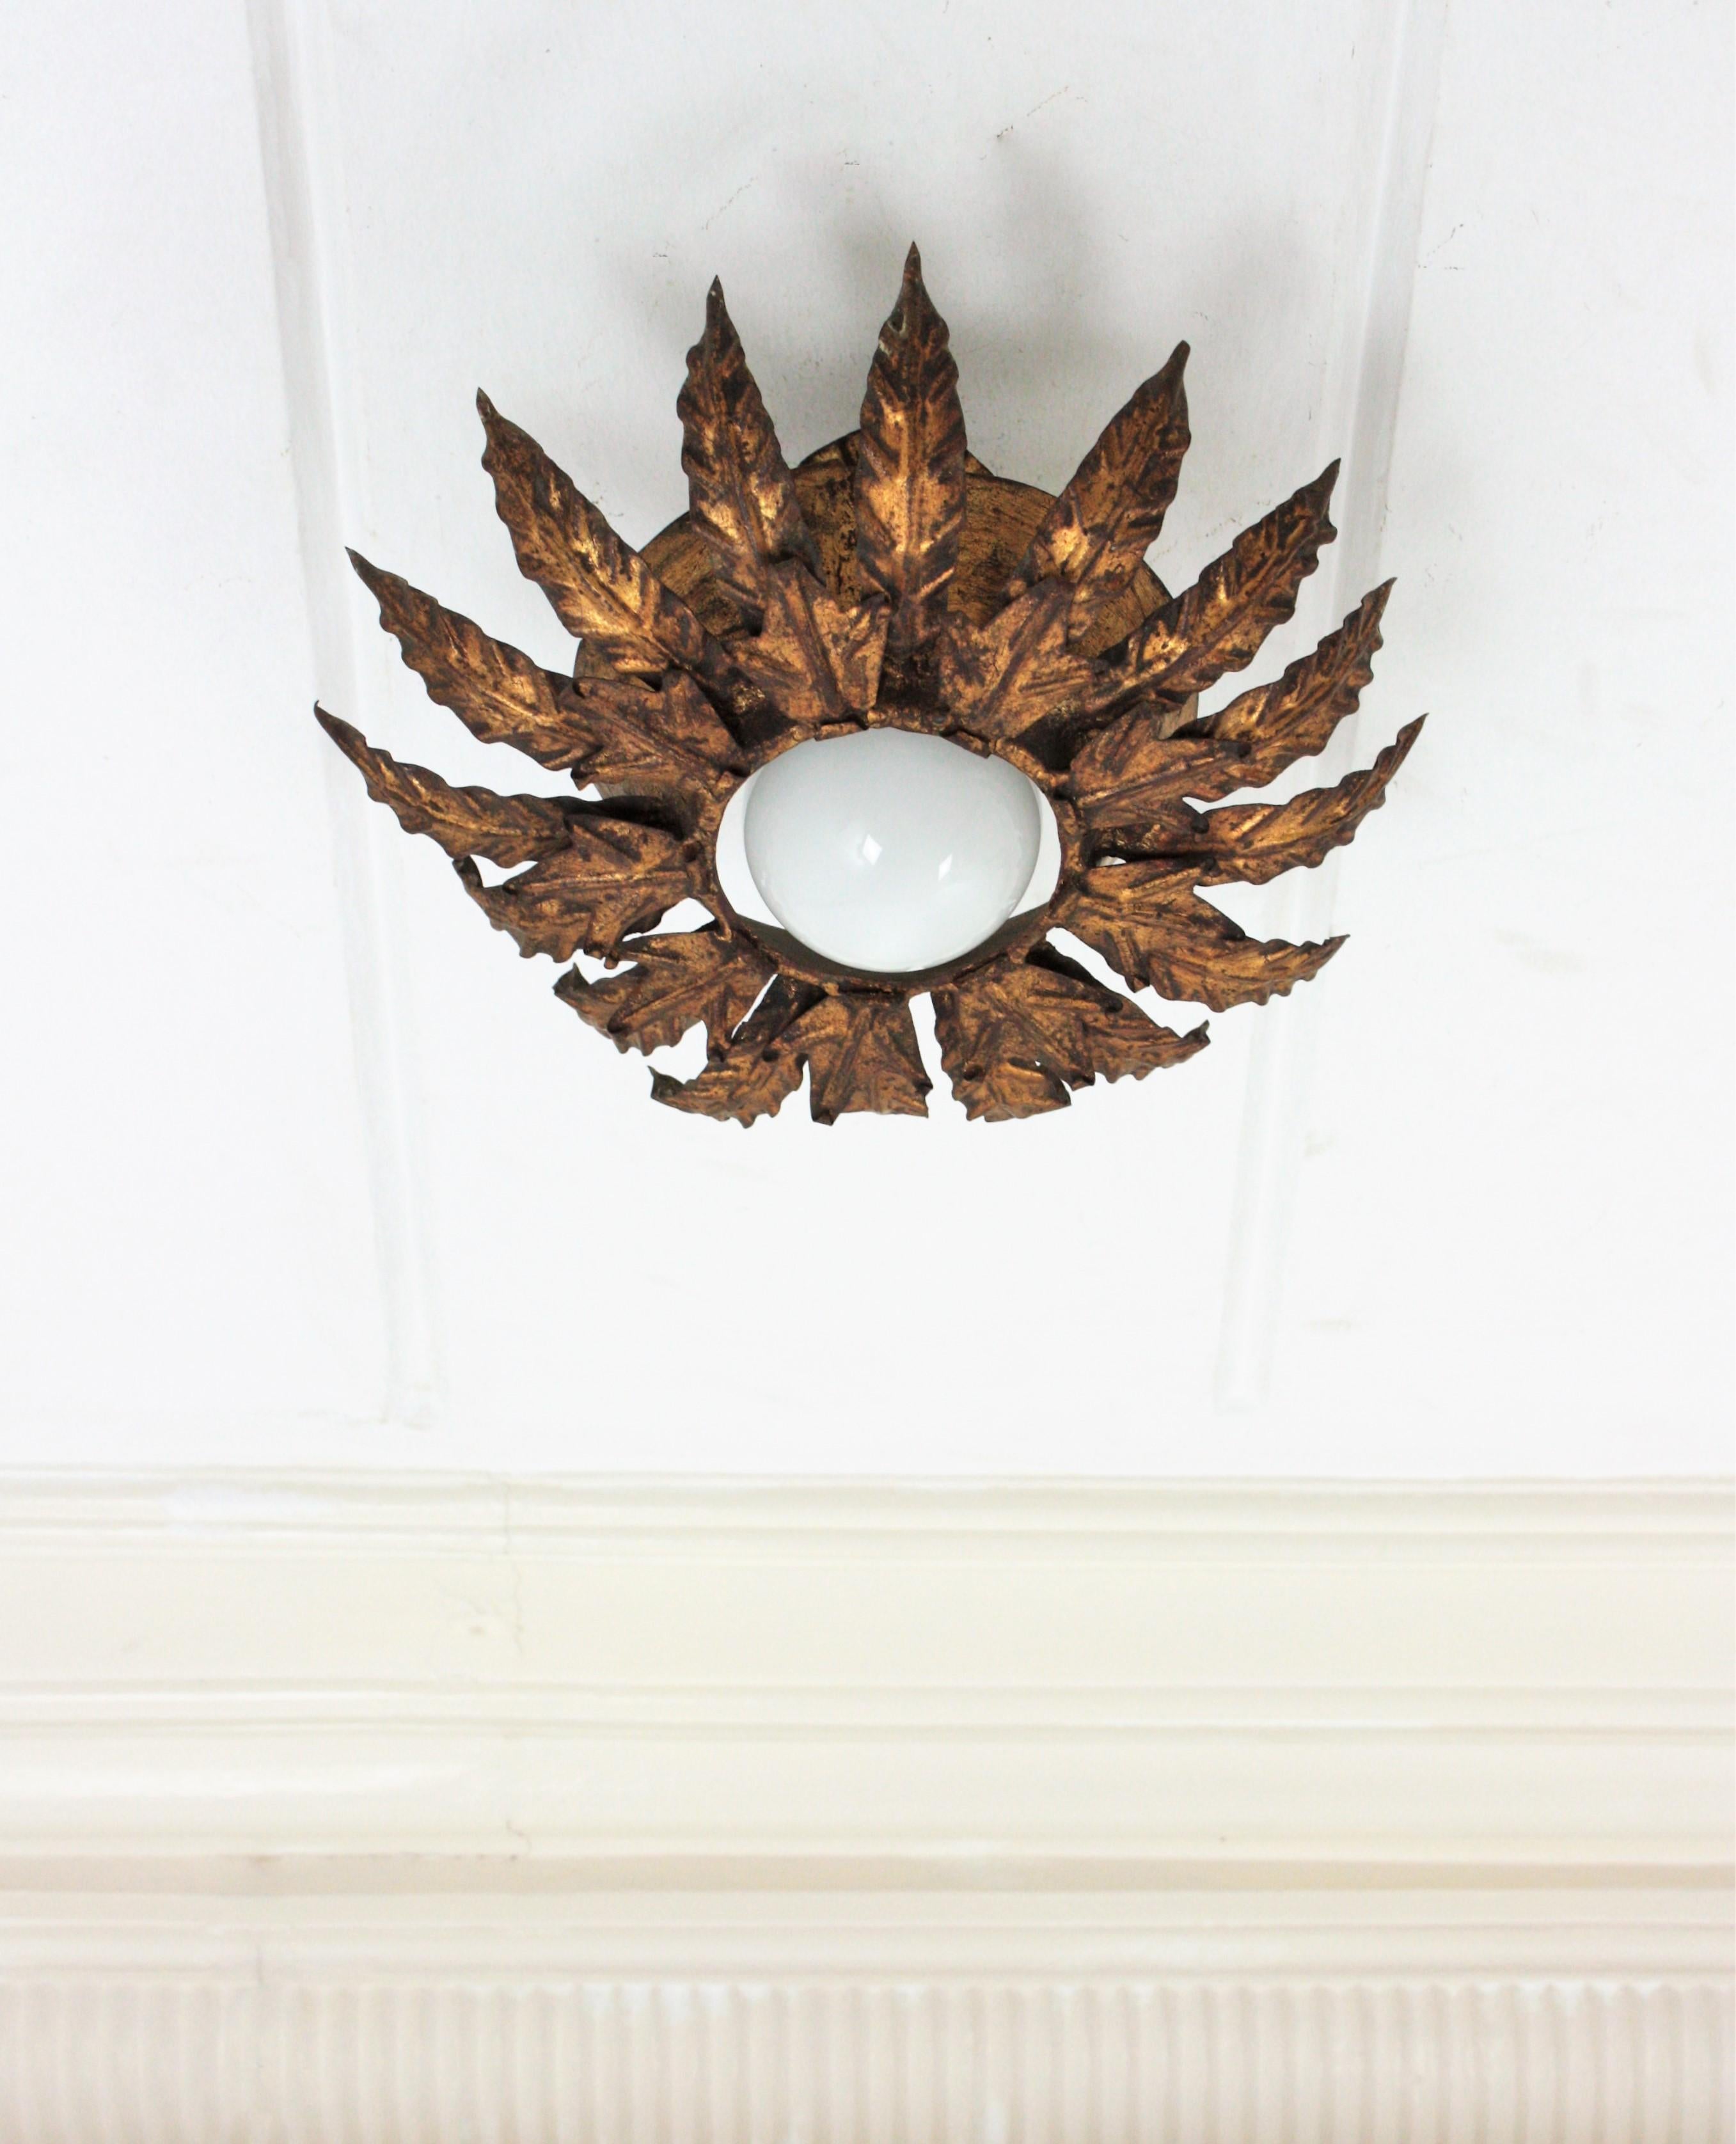 Brutalist Leafed Flower sunburst flush mount, gilt iron, gold leaf, Spain, 1950s.
Eye-catching light fixture made of iron featuring two layers of leaves gilded iwith gold leaf surrounding a central light with an exposed bulb. It has a terrific